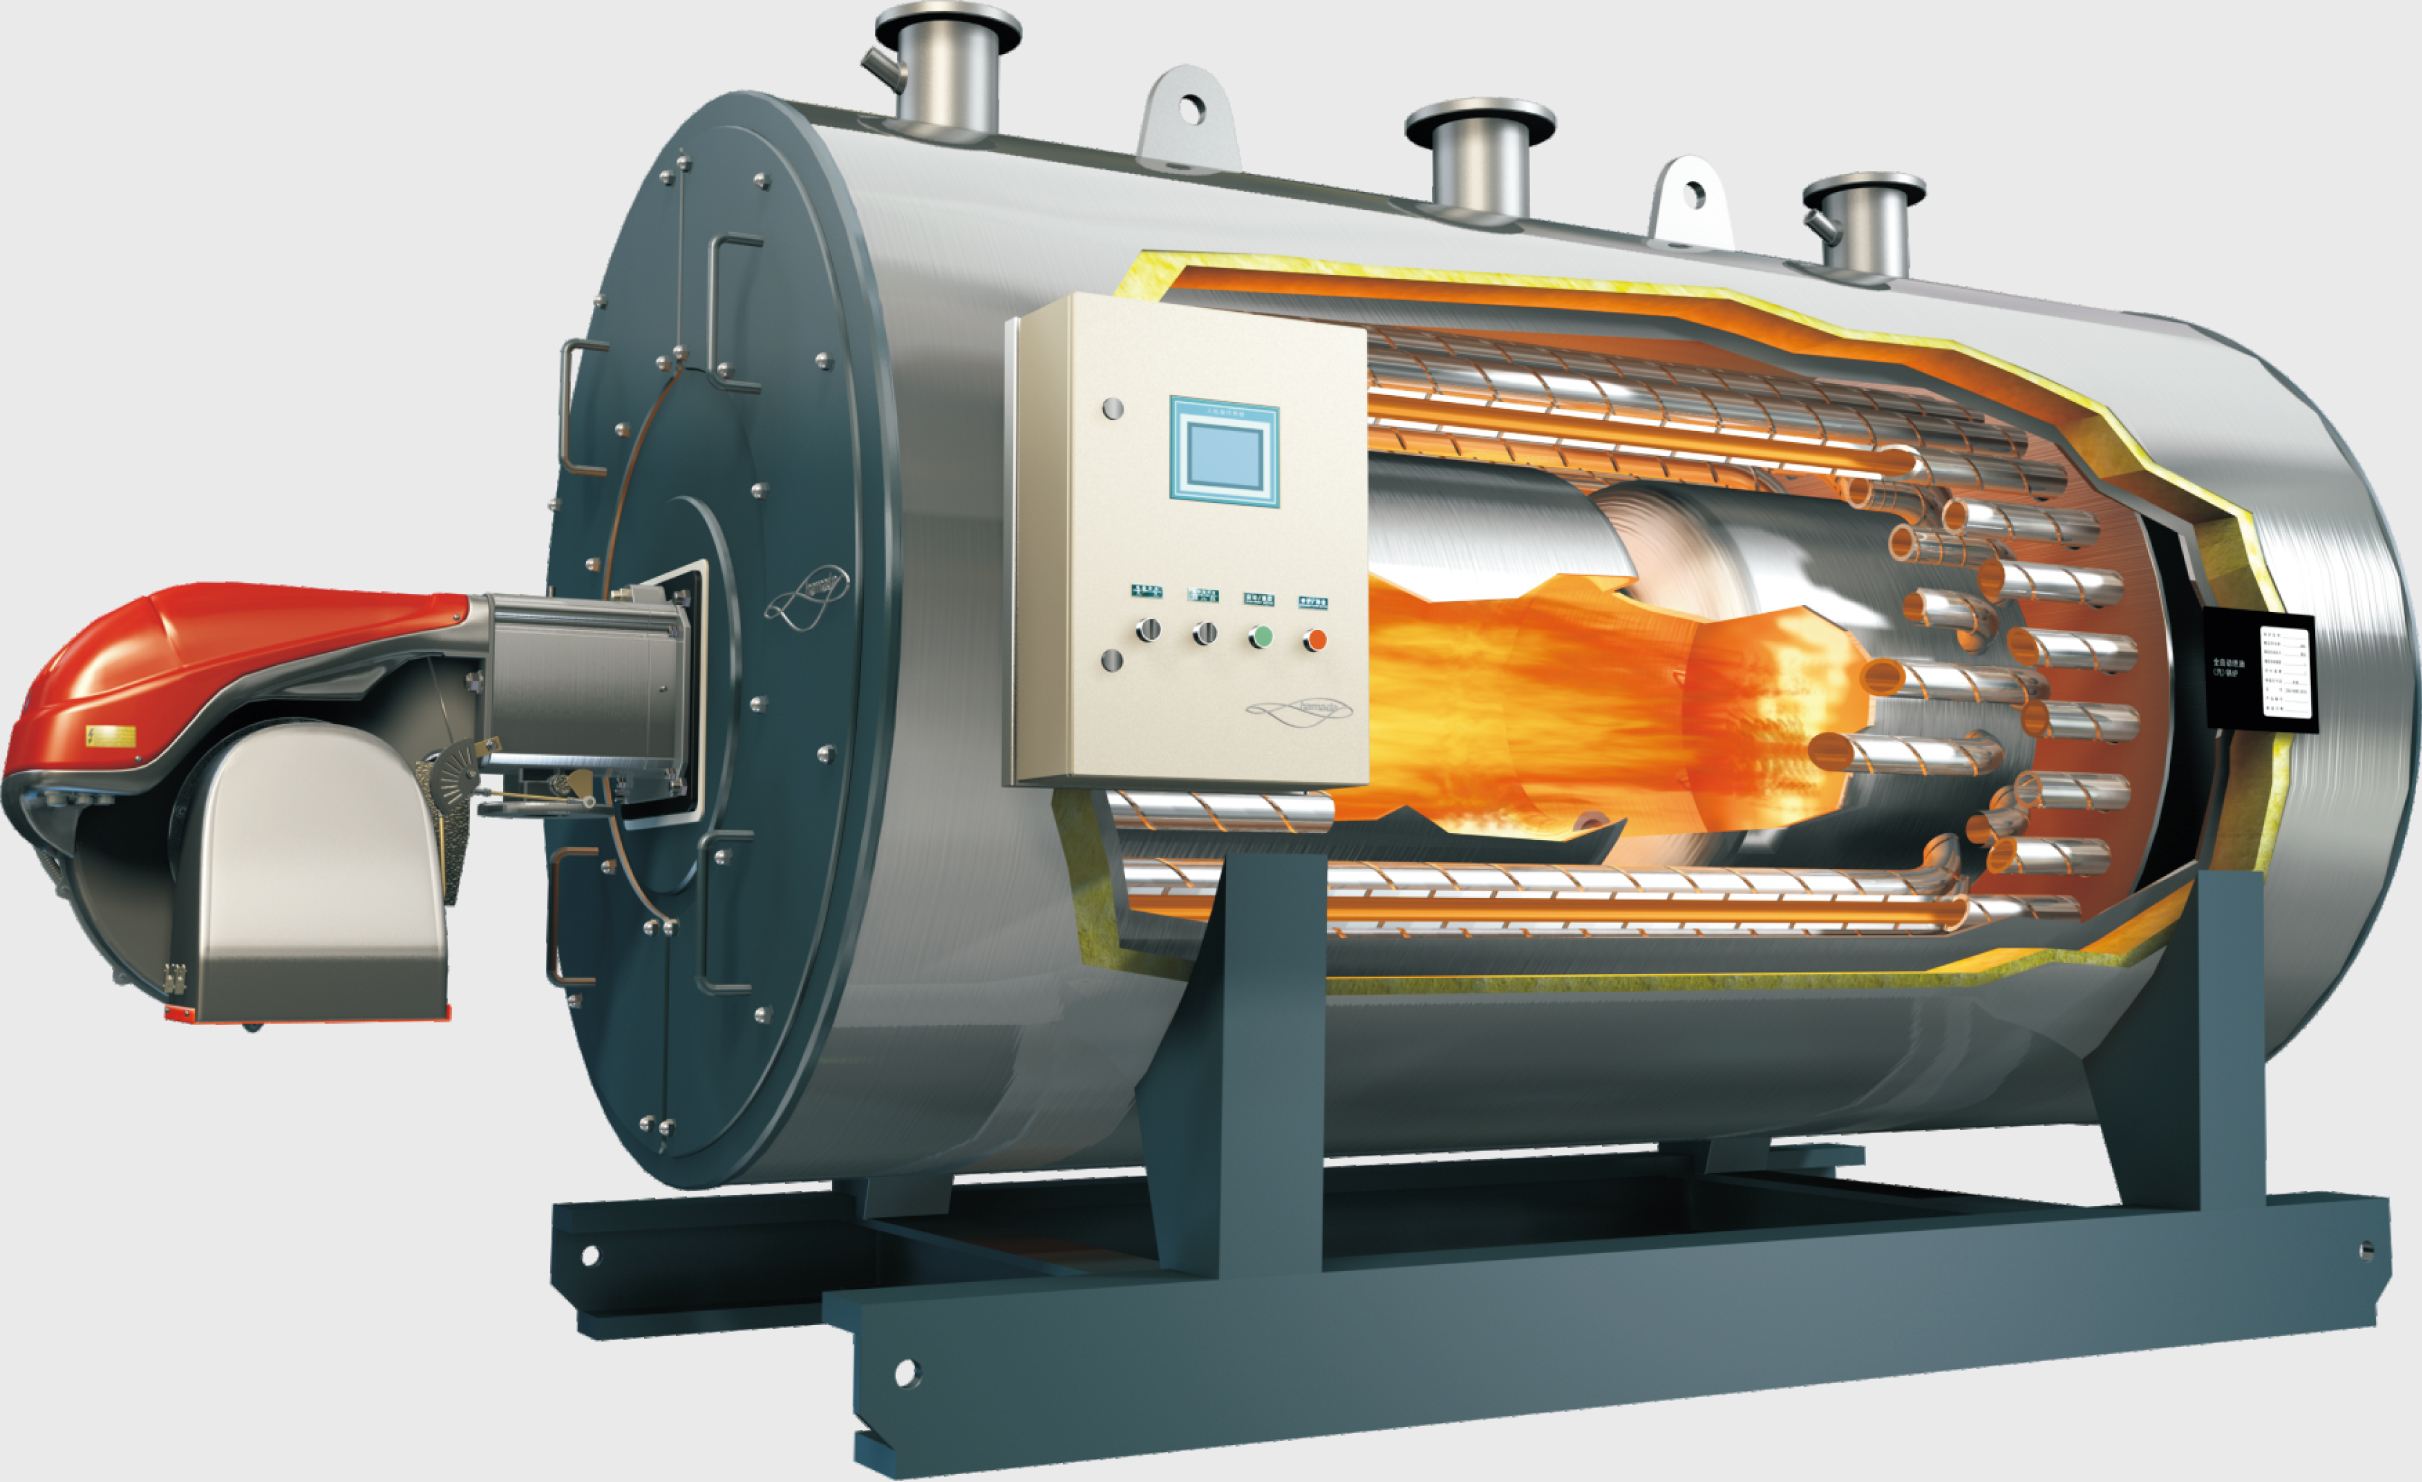 About steam boiler фото 69